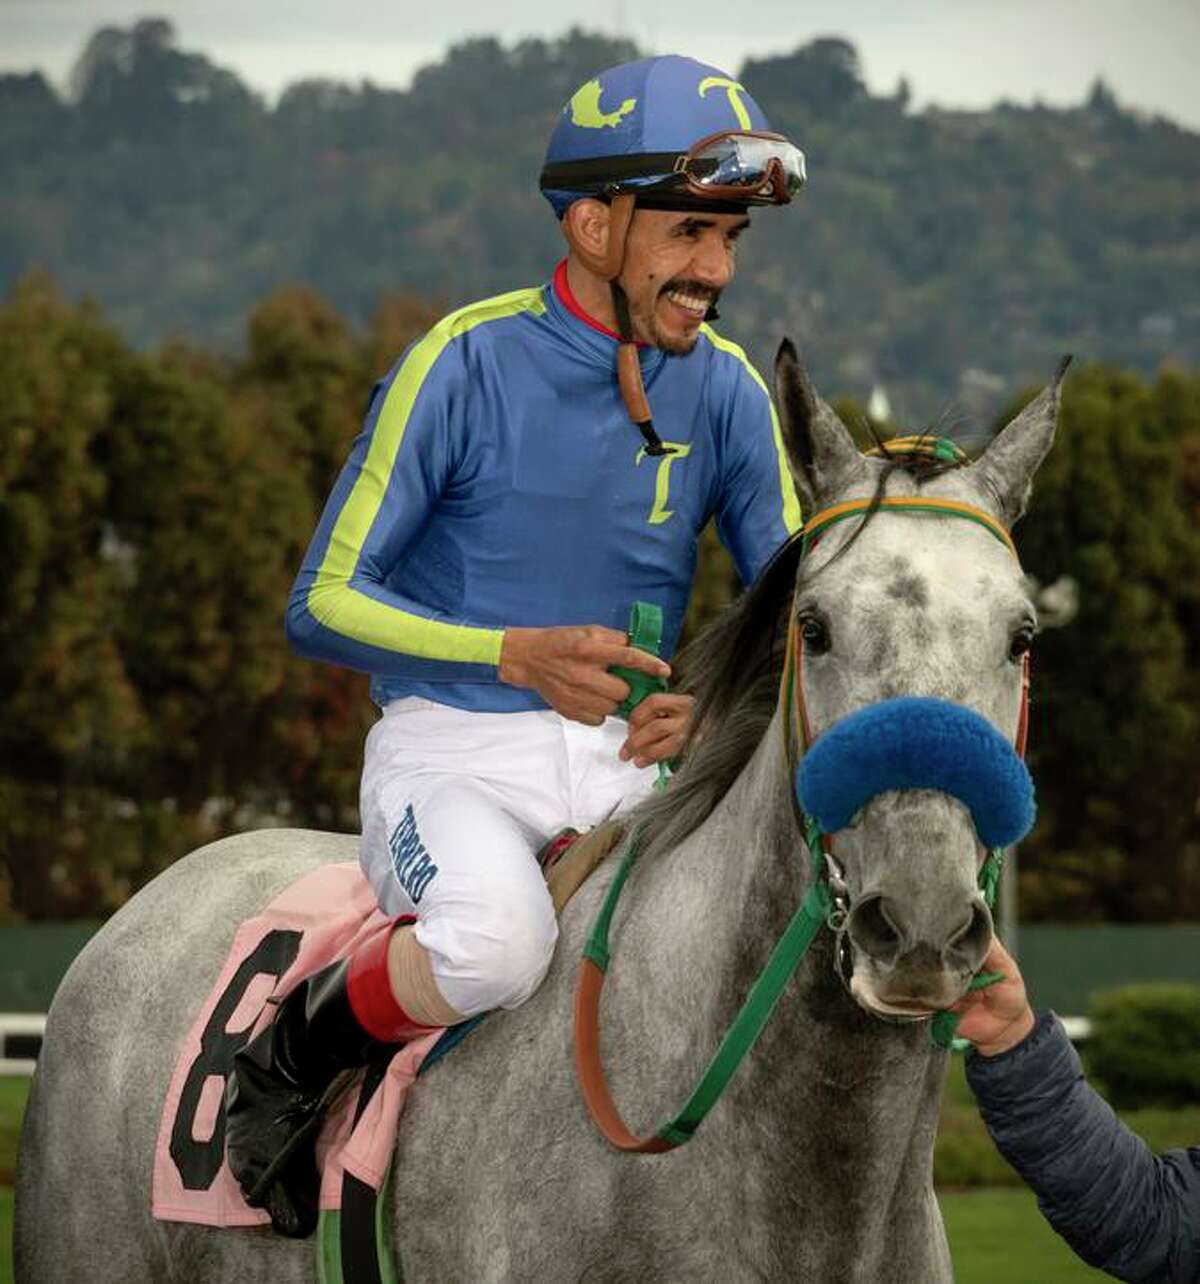 Pedro Terrero has enjoyed the greatest success of his 13-year career as a jockey after returning from two years of rehabilitation.